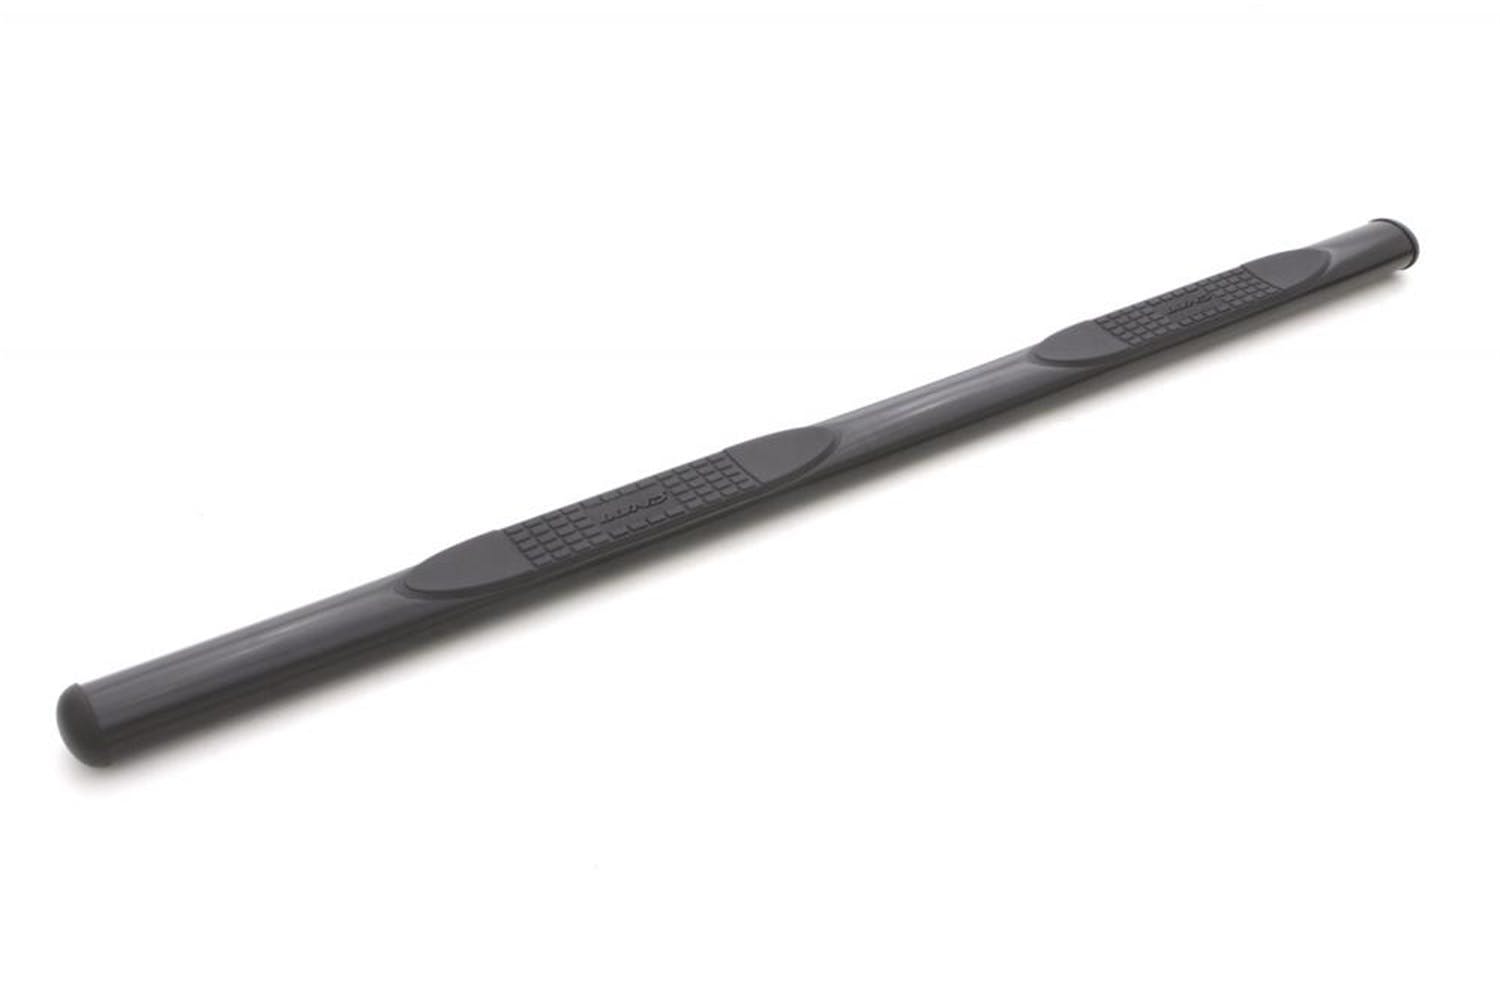 LUND 23610546 4 Inch Oval Straight Nerf Bar - Black 4 In OVAL STRAIGHT STEEL